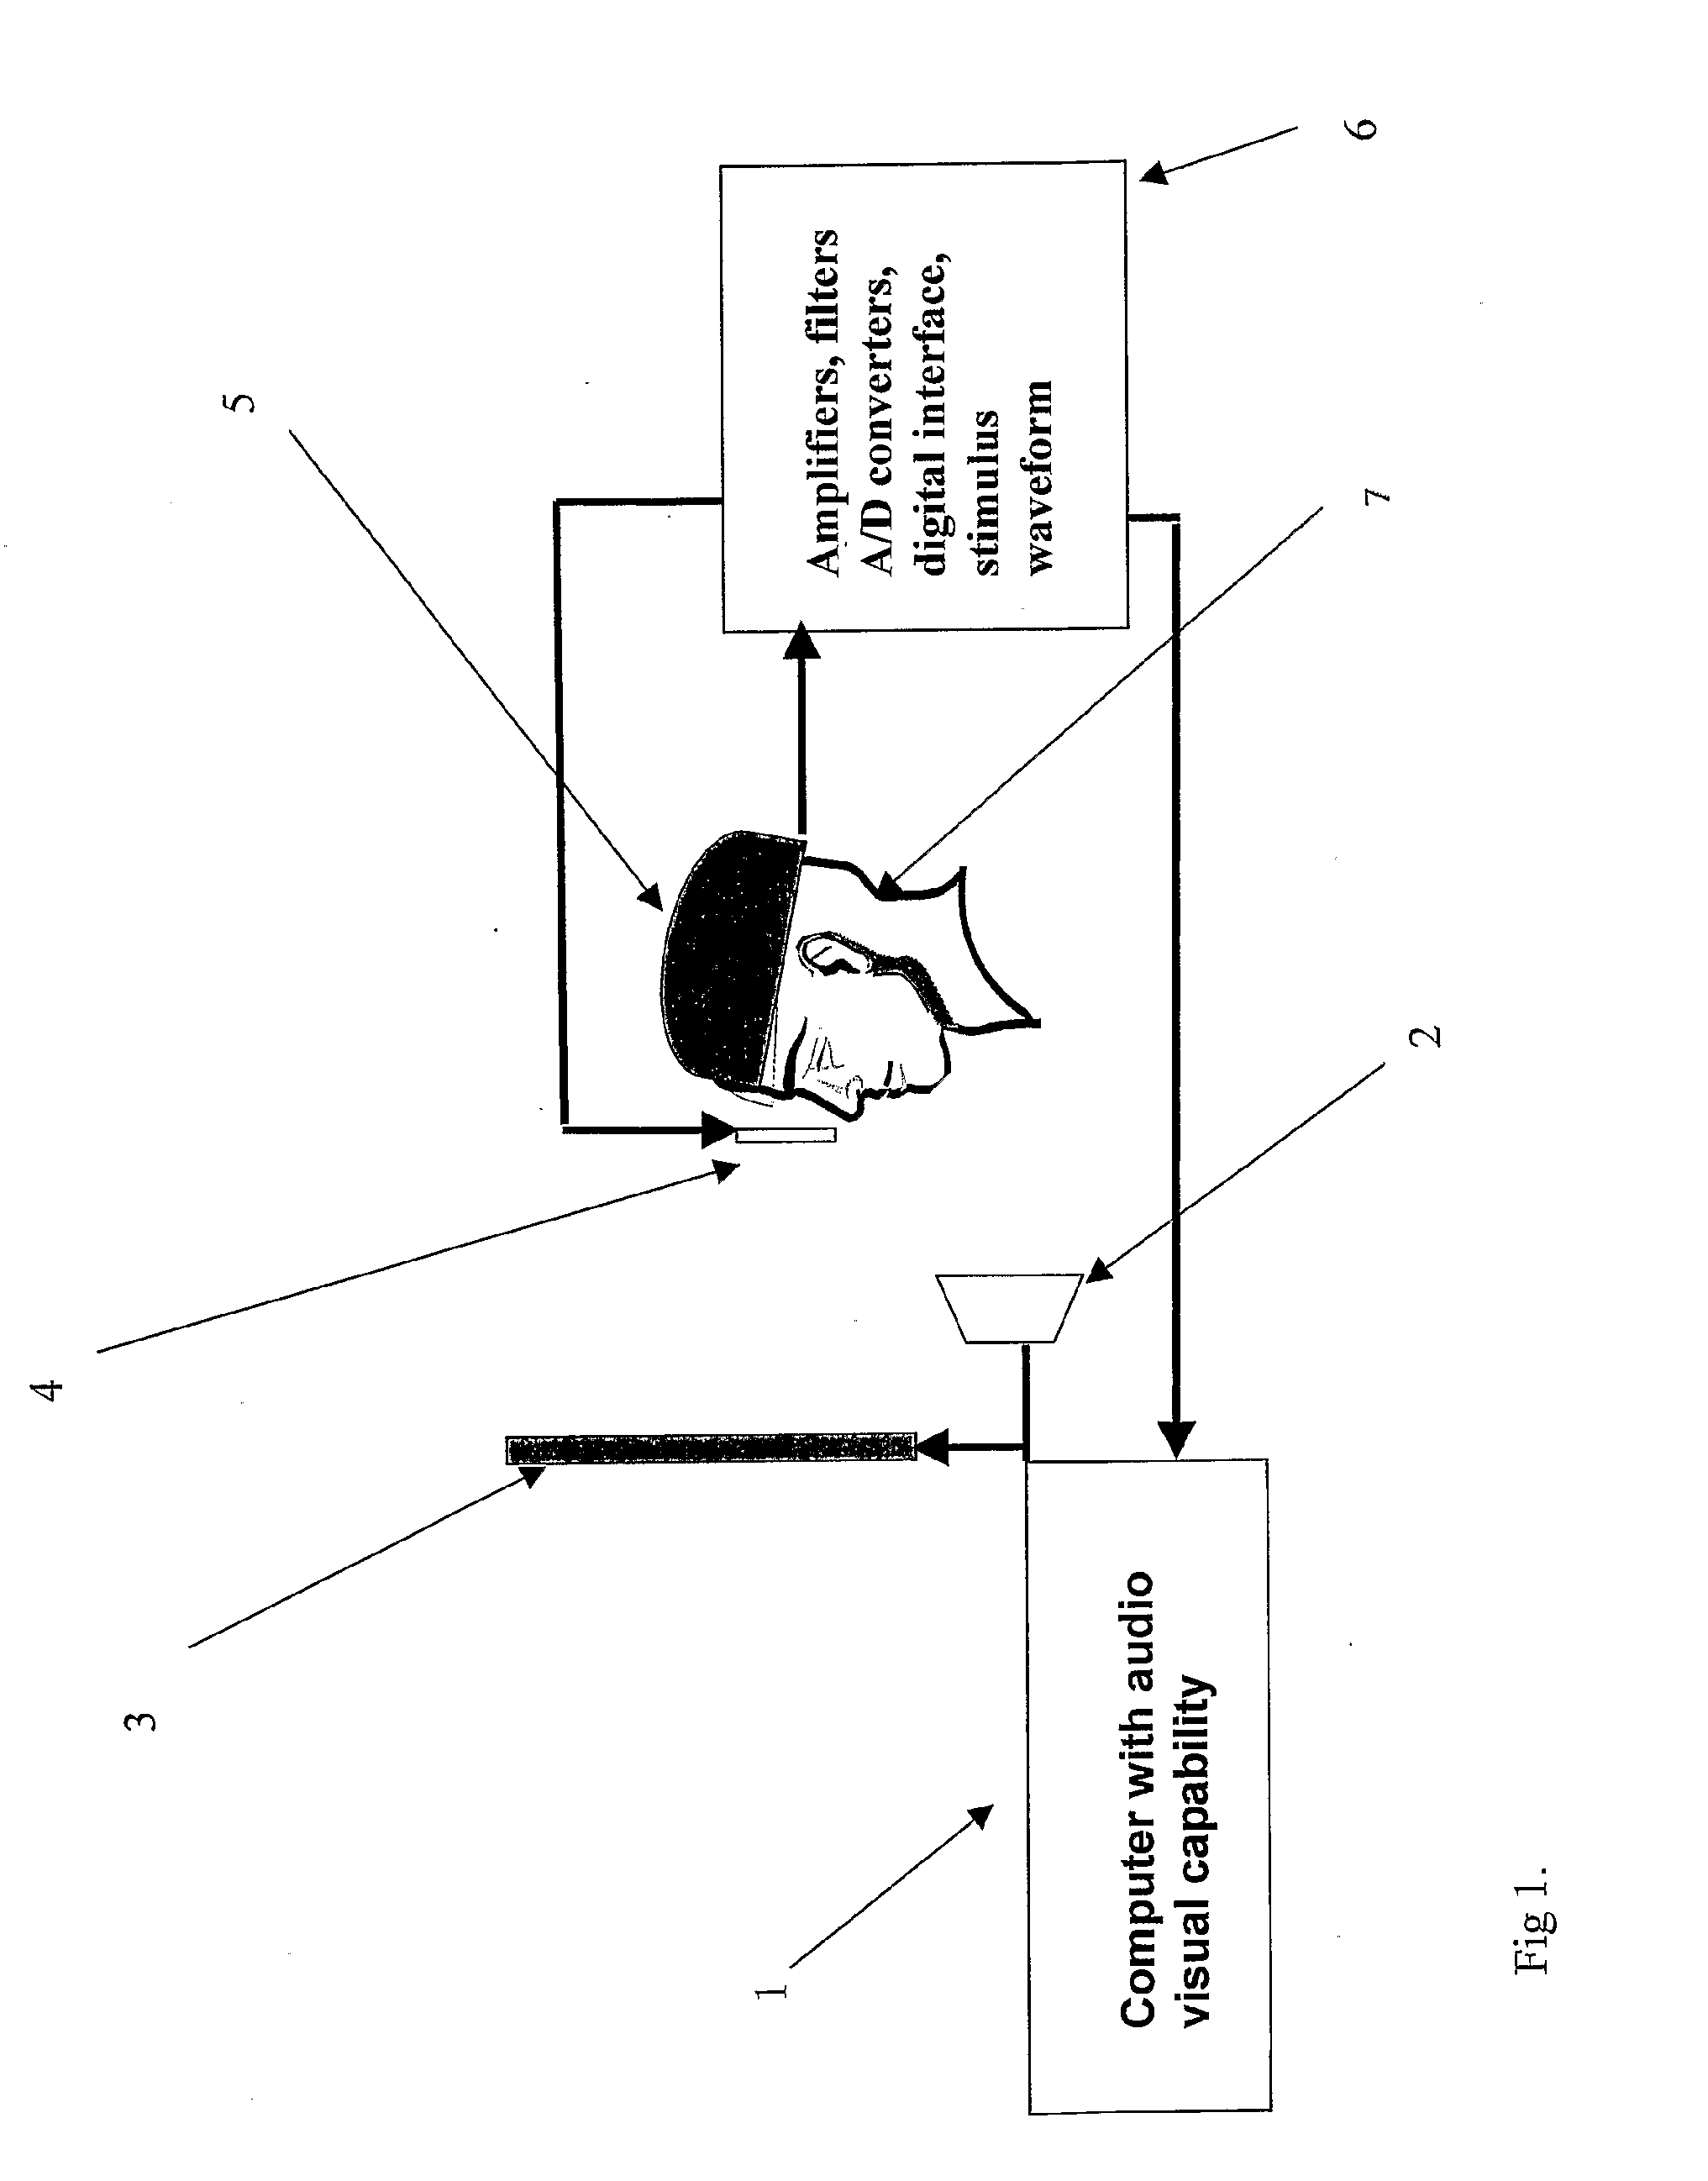 Method For Evaluating The Effectiveness Of Commercial Communication